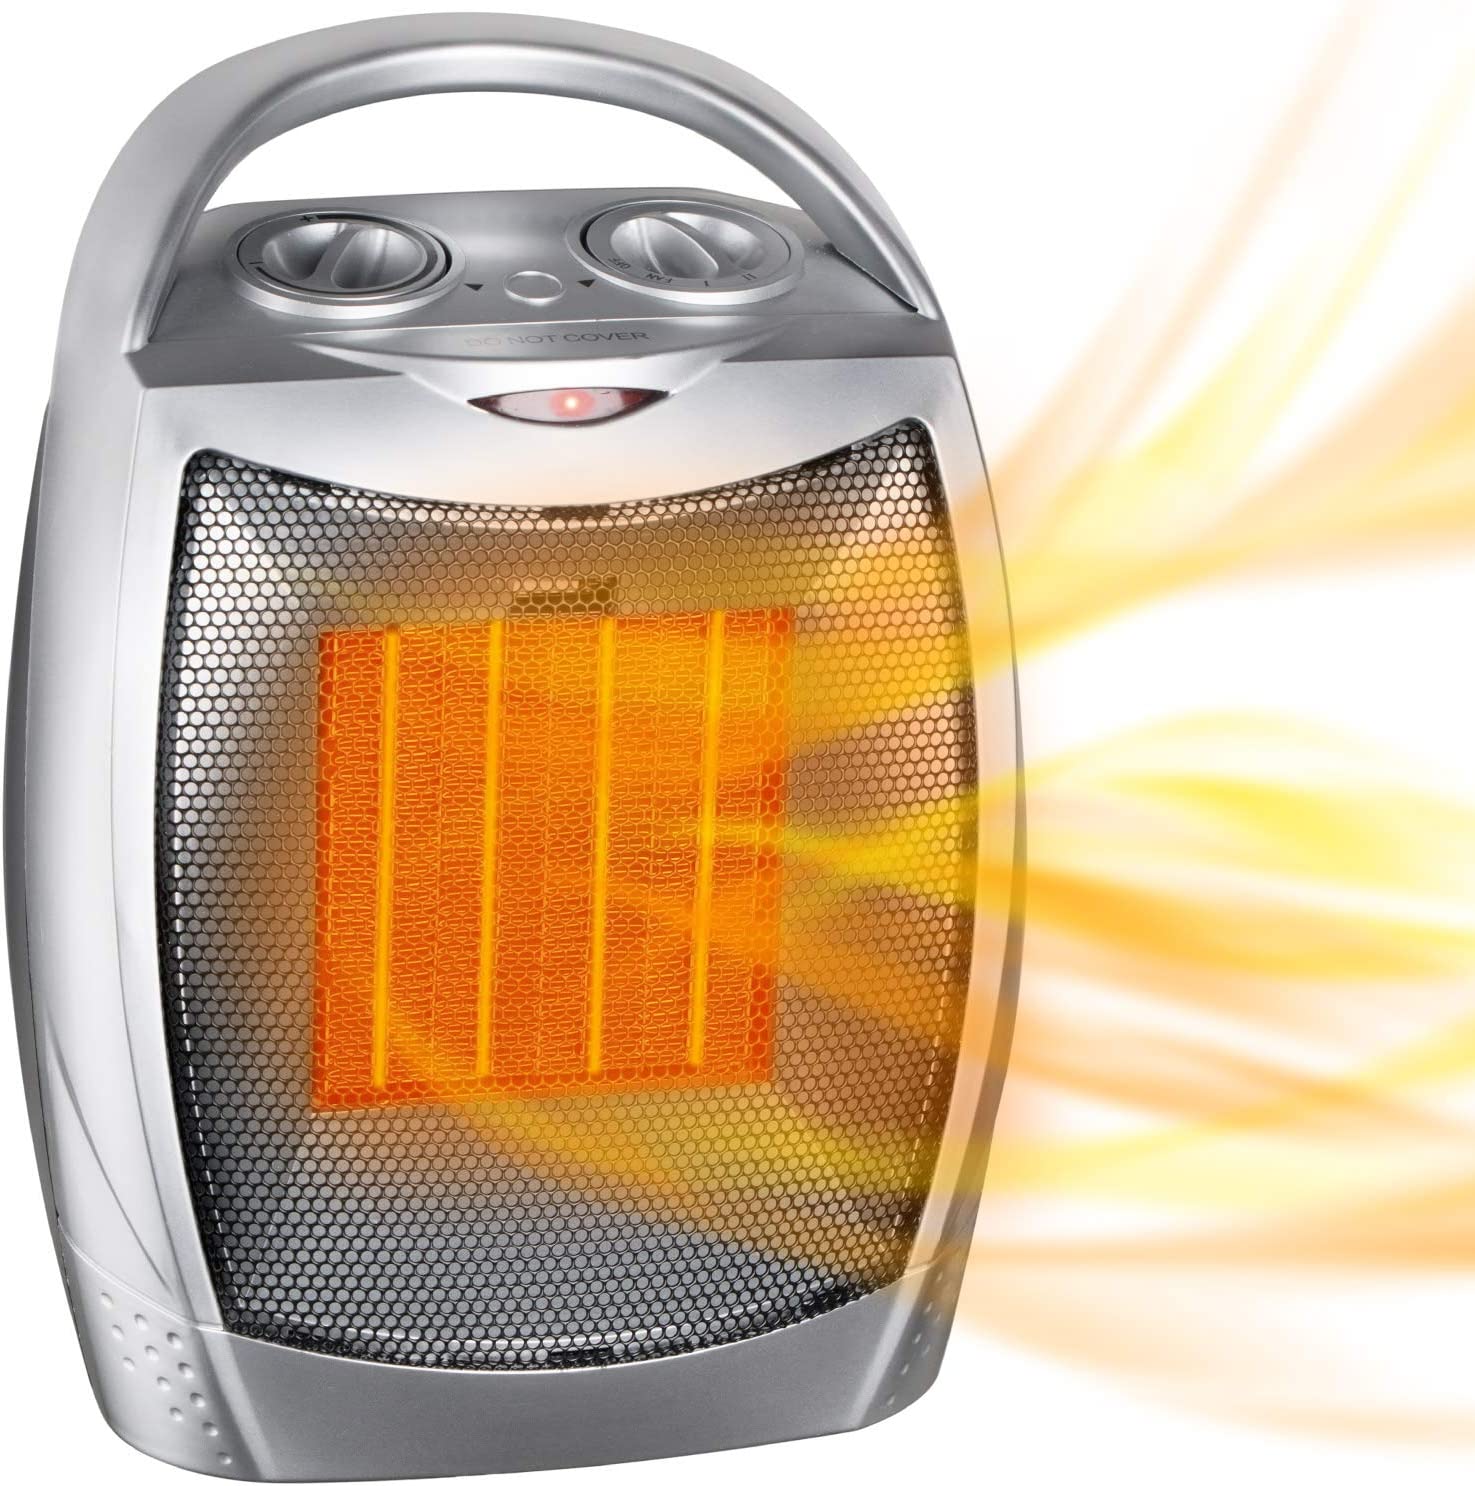 The Best Electric Space Heater in 2022